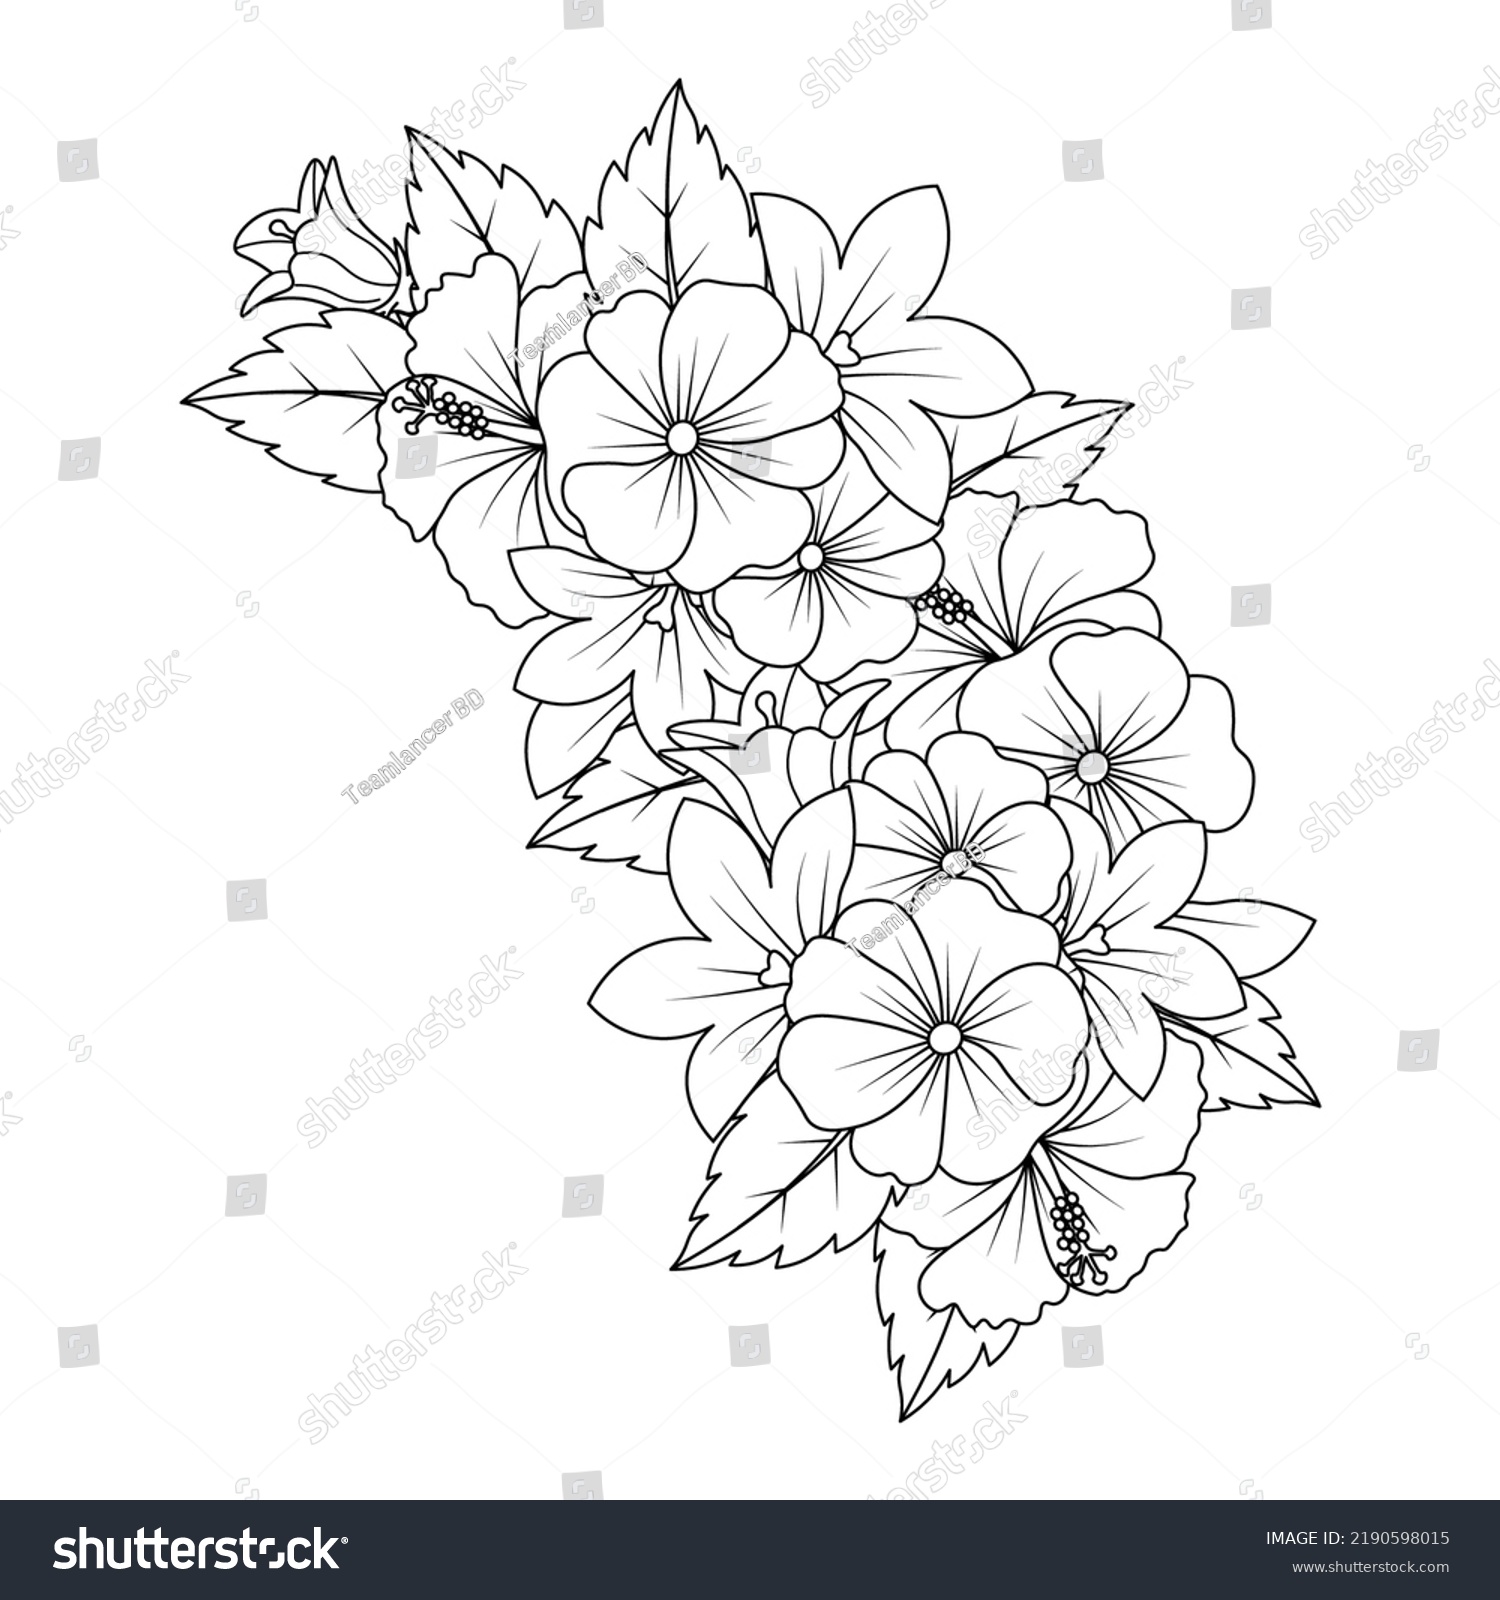 Hibiscus Flower Coloring Page Detailed Line Stock Vector (Royalty Free ...